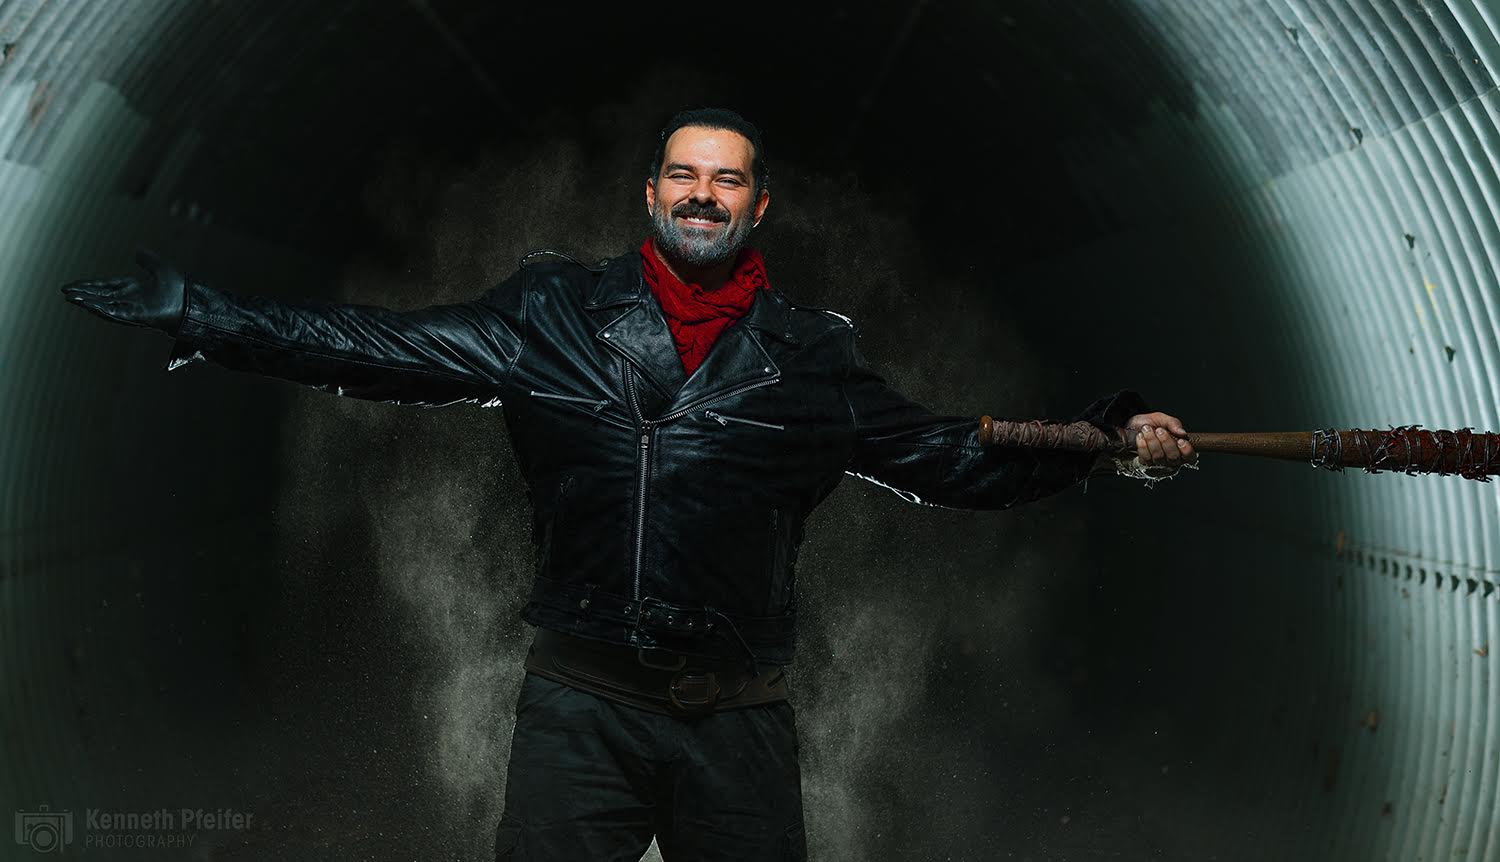 Negan Cosplay Is Going To Kill Your Favourite Halloween Character